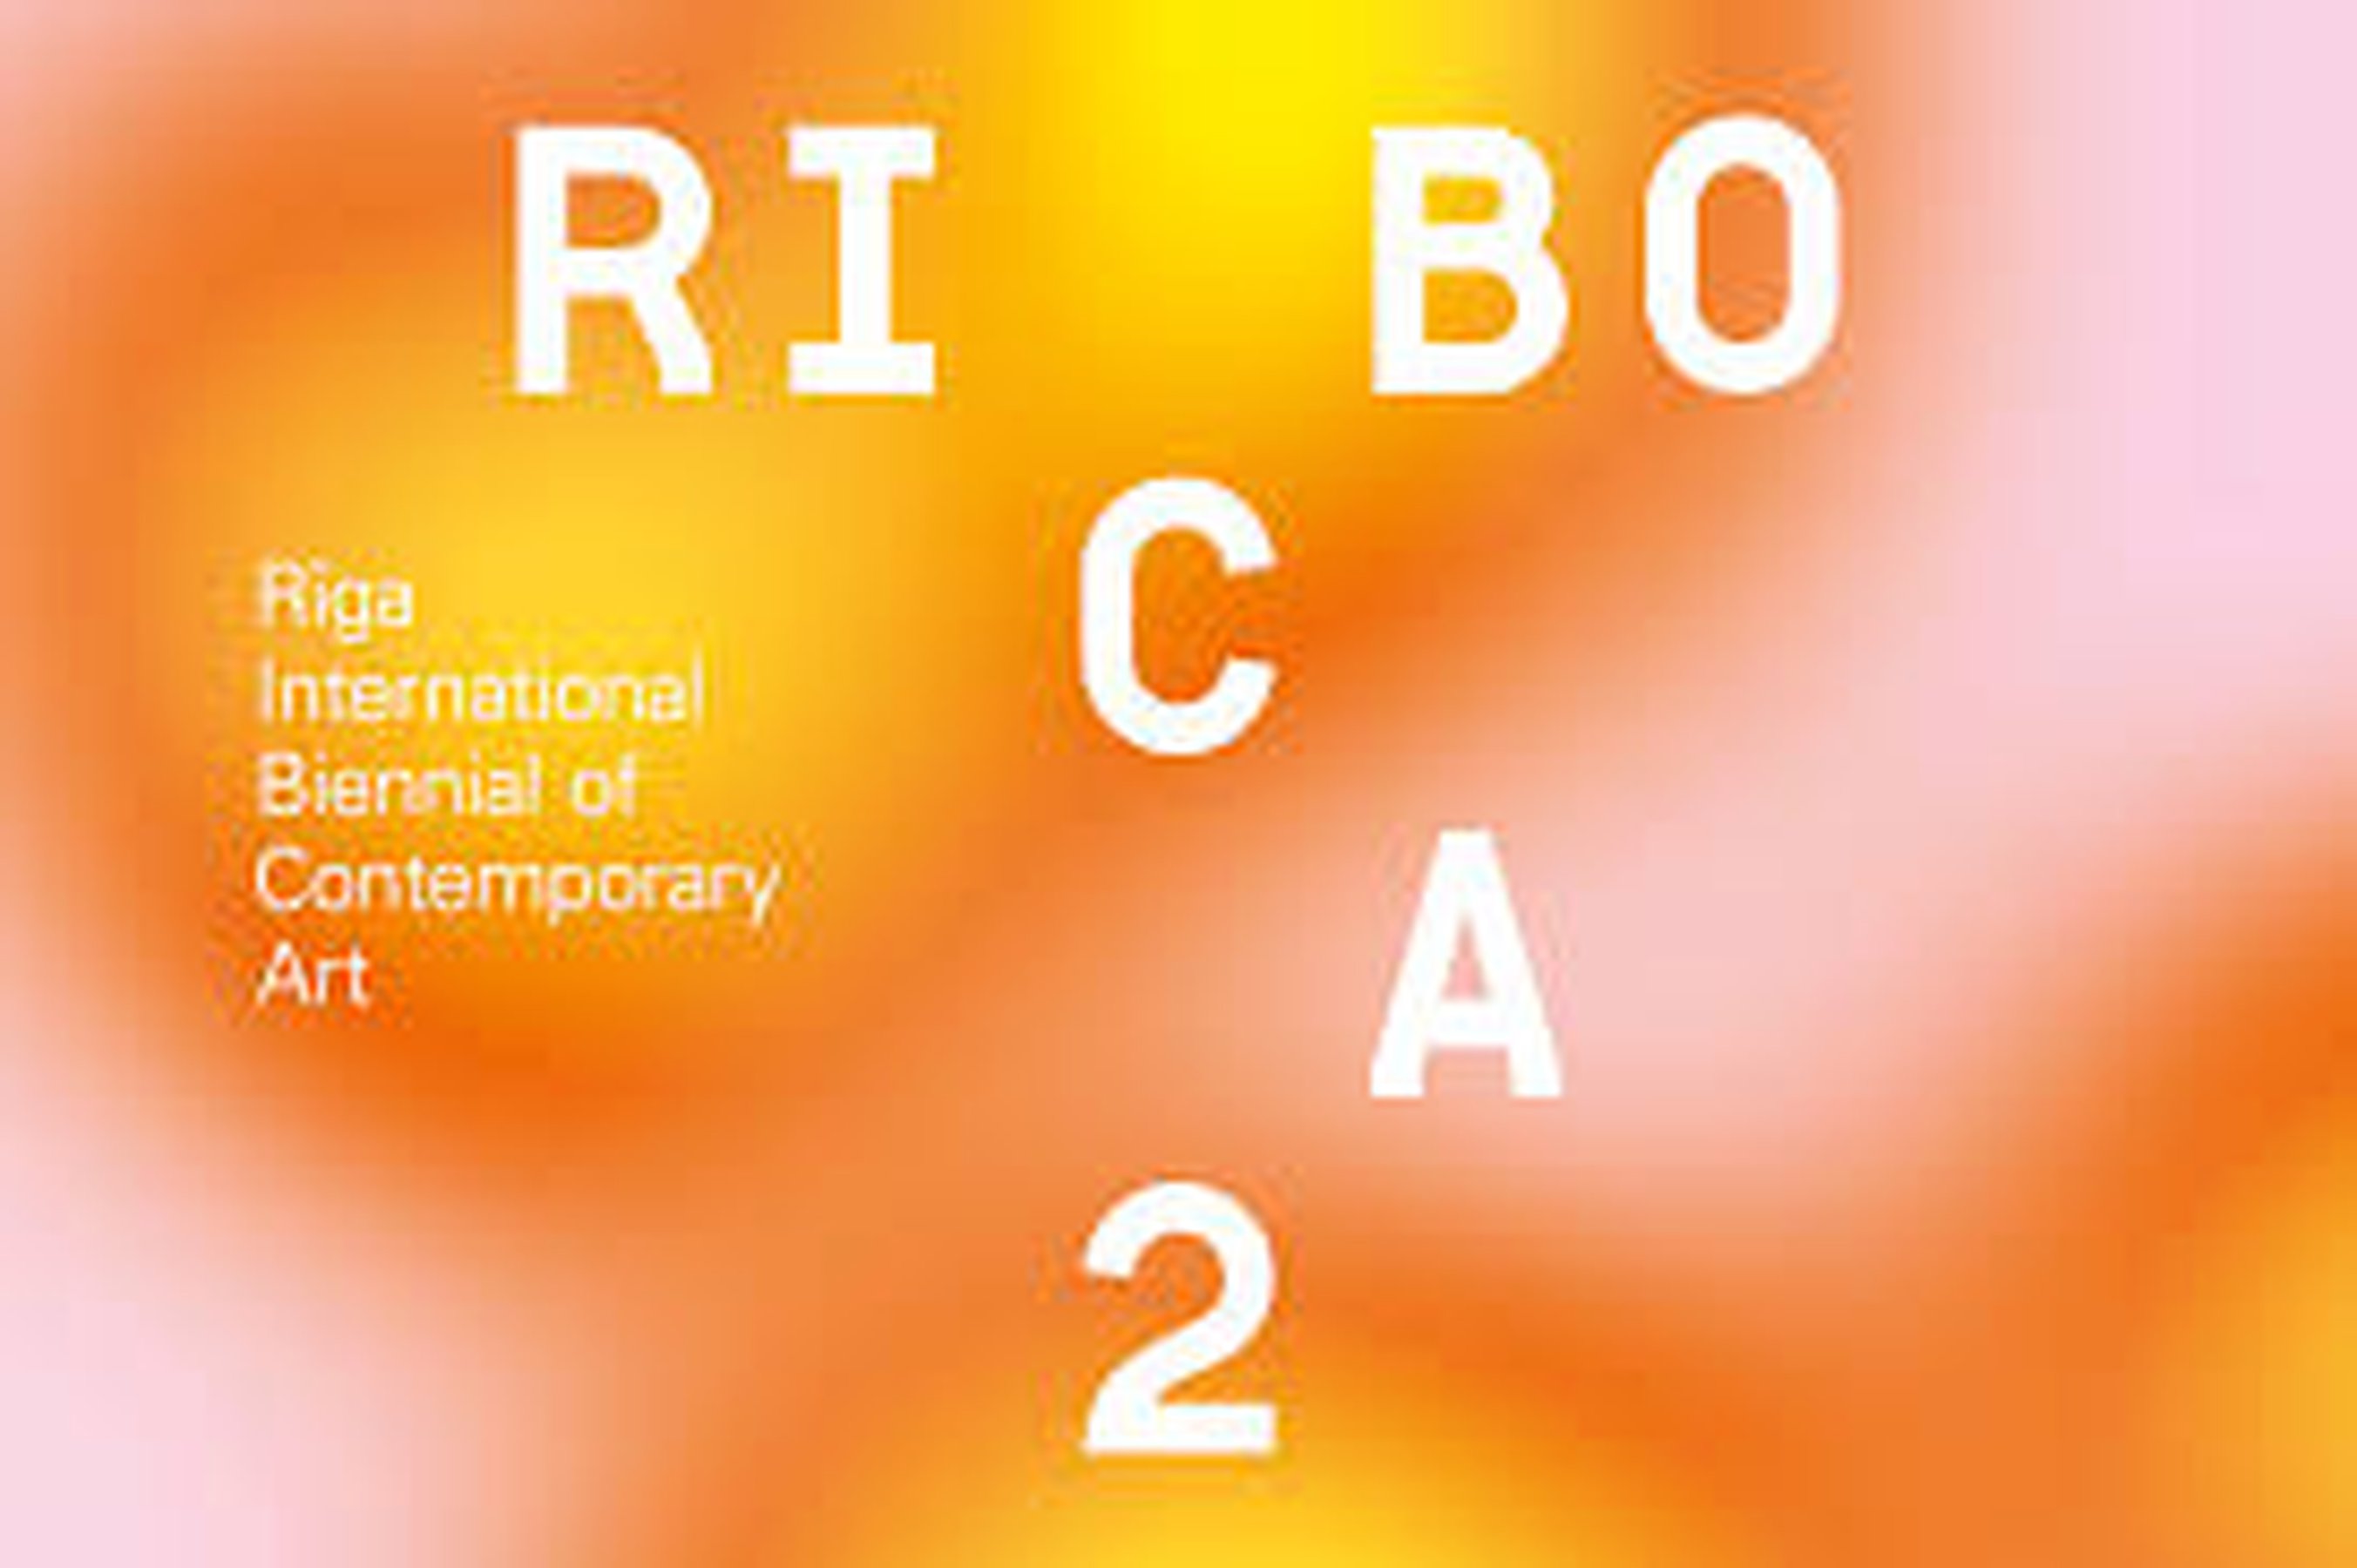 And suddenly it all blossoms | 2nd Riga Biennial (RIBOCA)